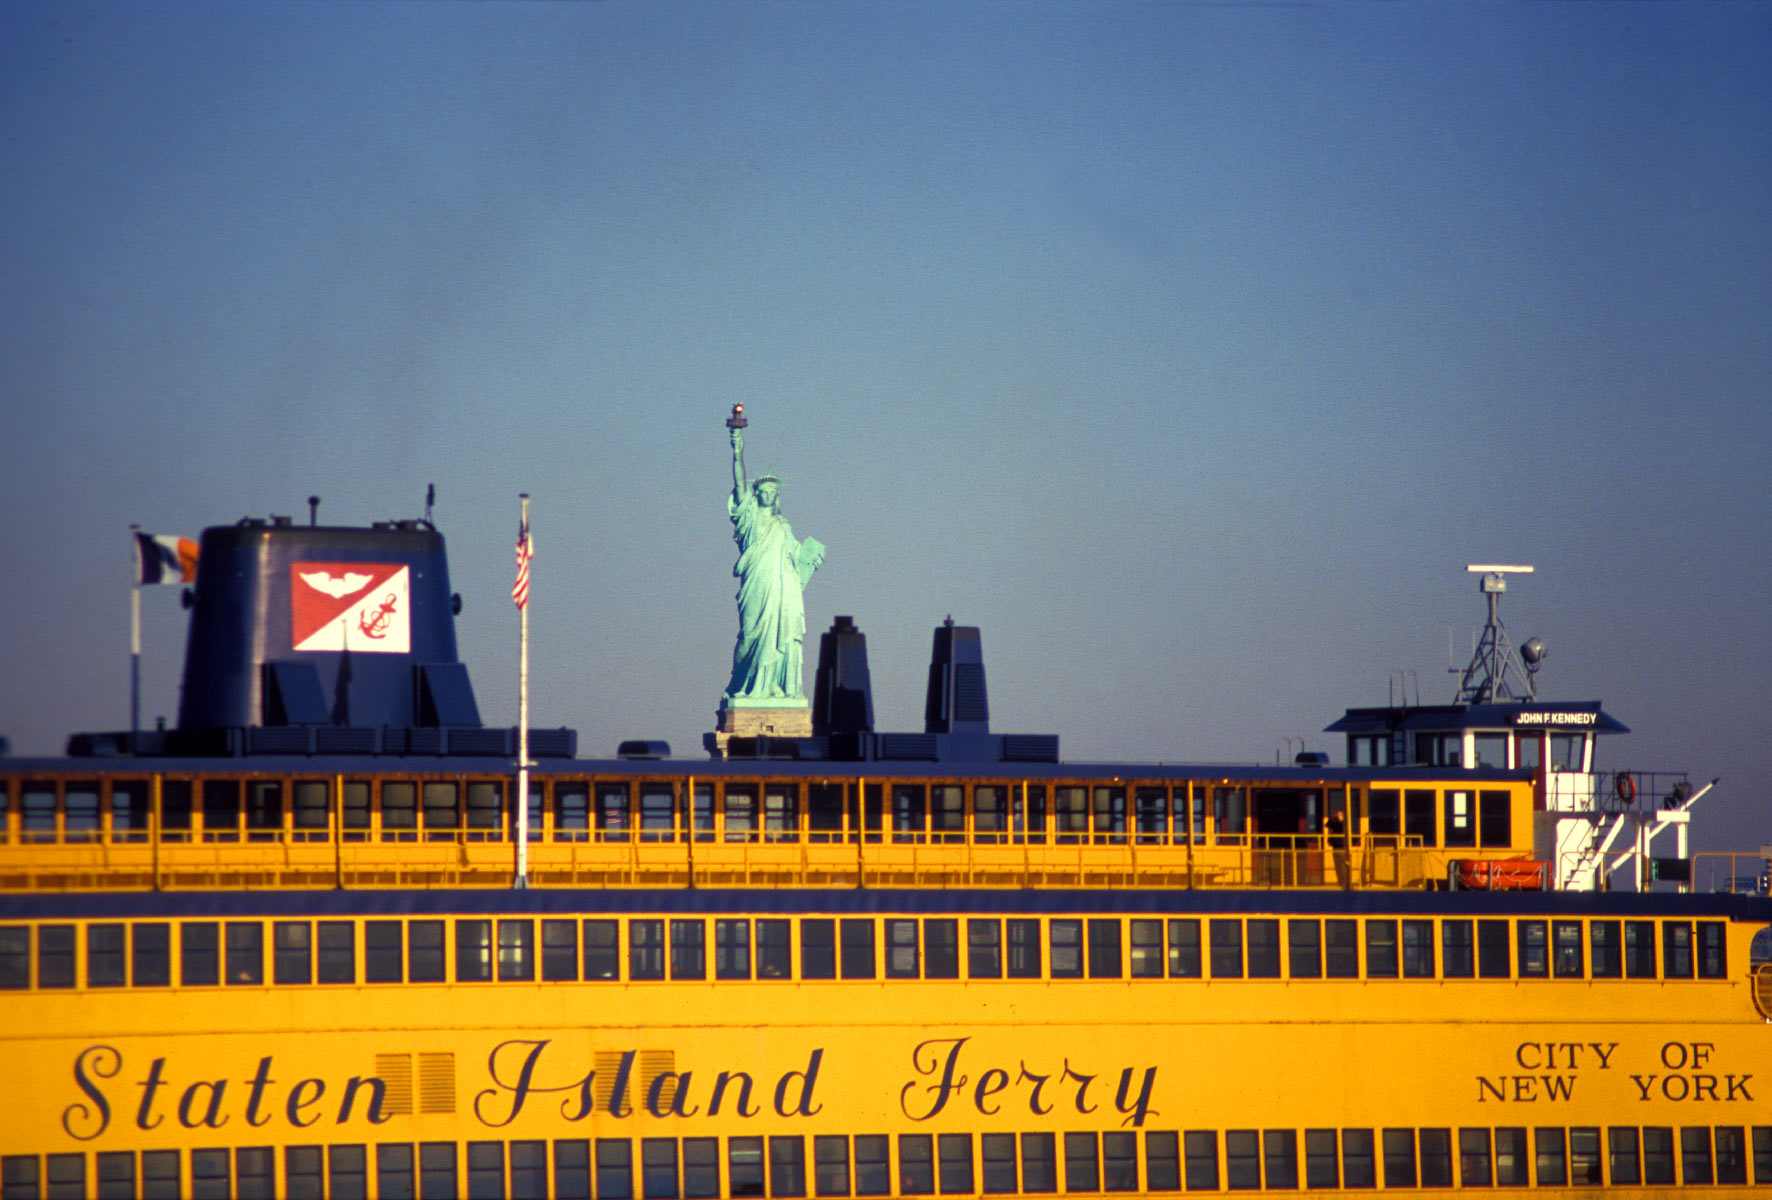 "Staten Island Ferry and The Statue of Liberty" <br>New York Harbor